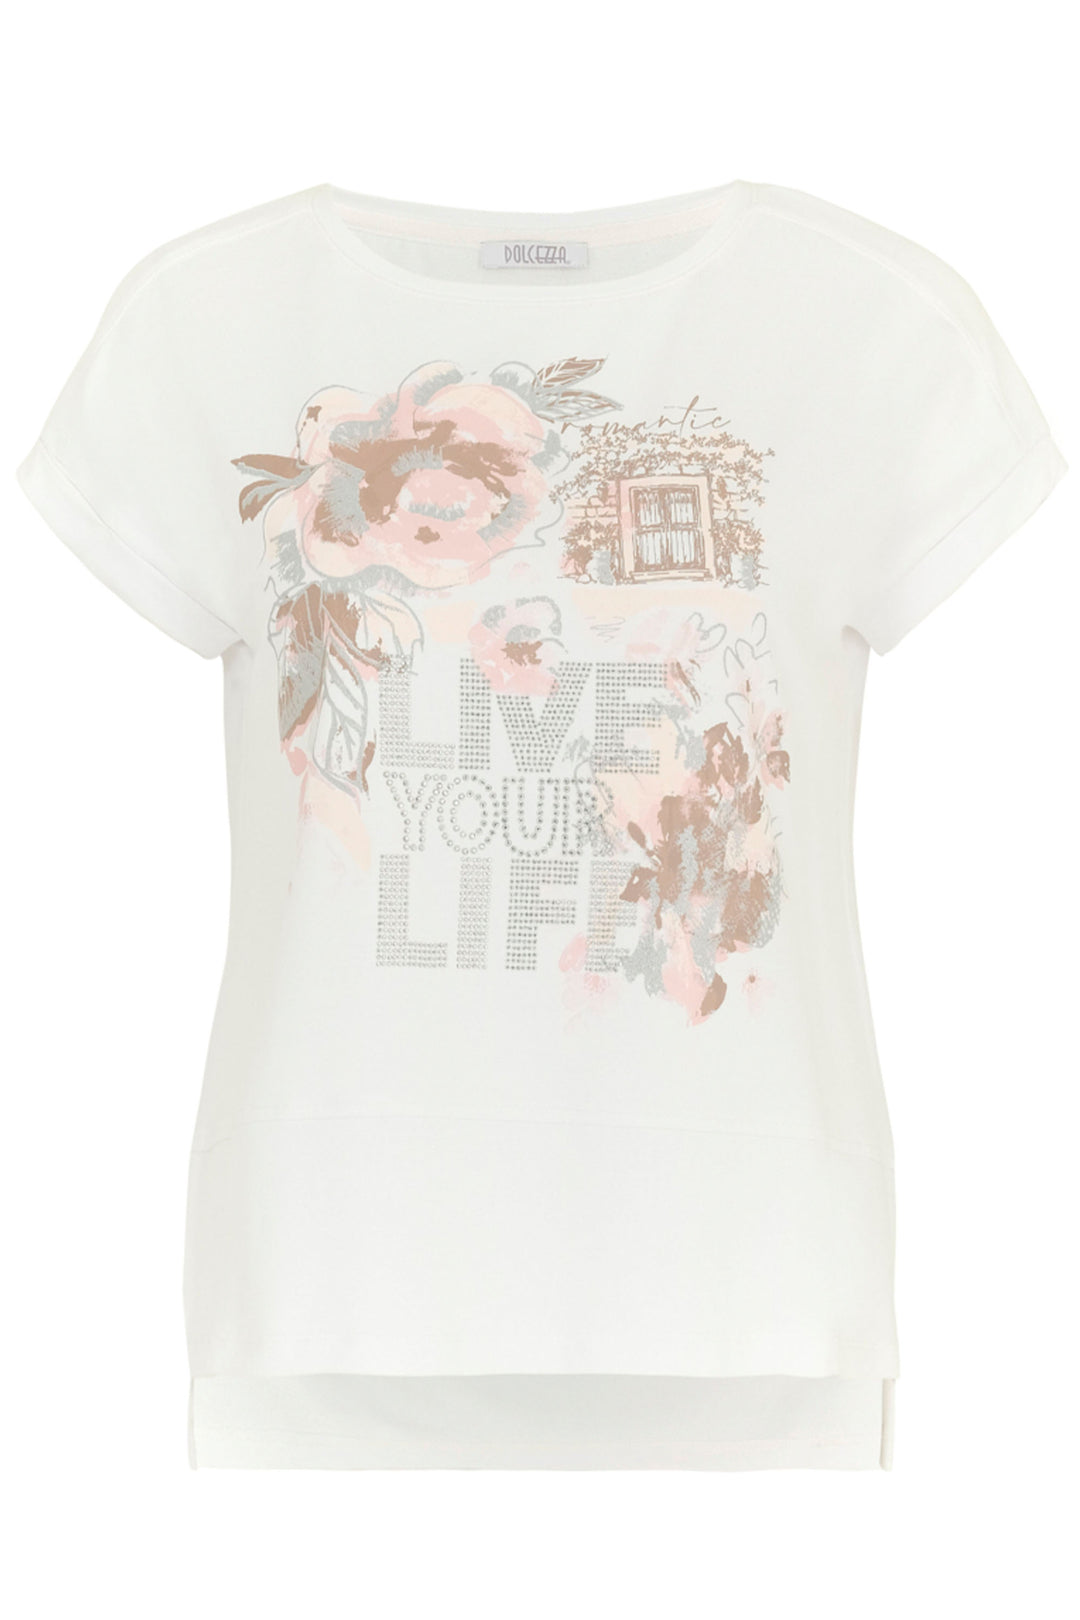 NIRVANA ELEGANCE WHITE PINK LIVE YOUR LIFE TOP